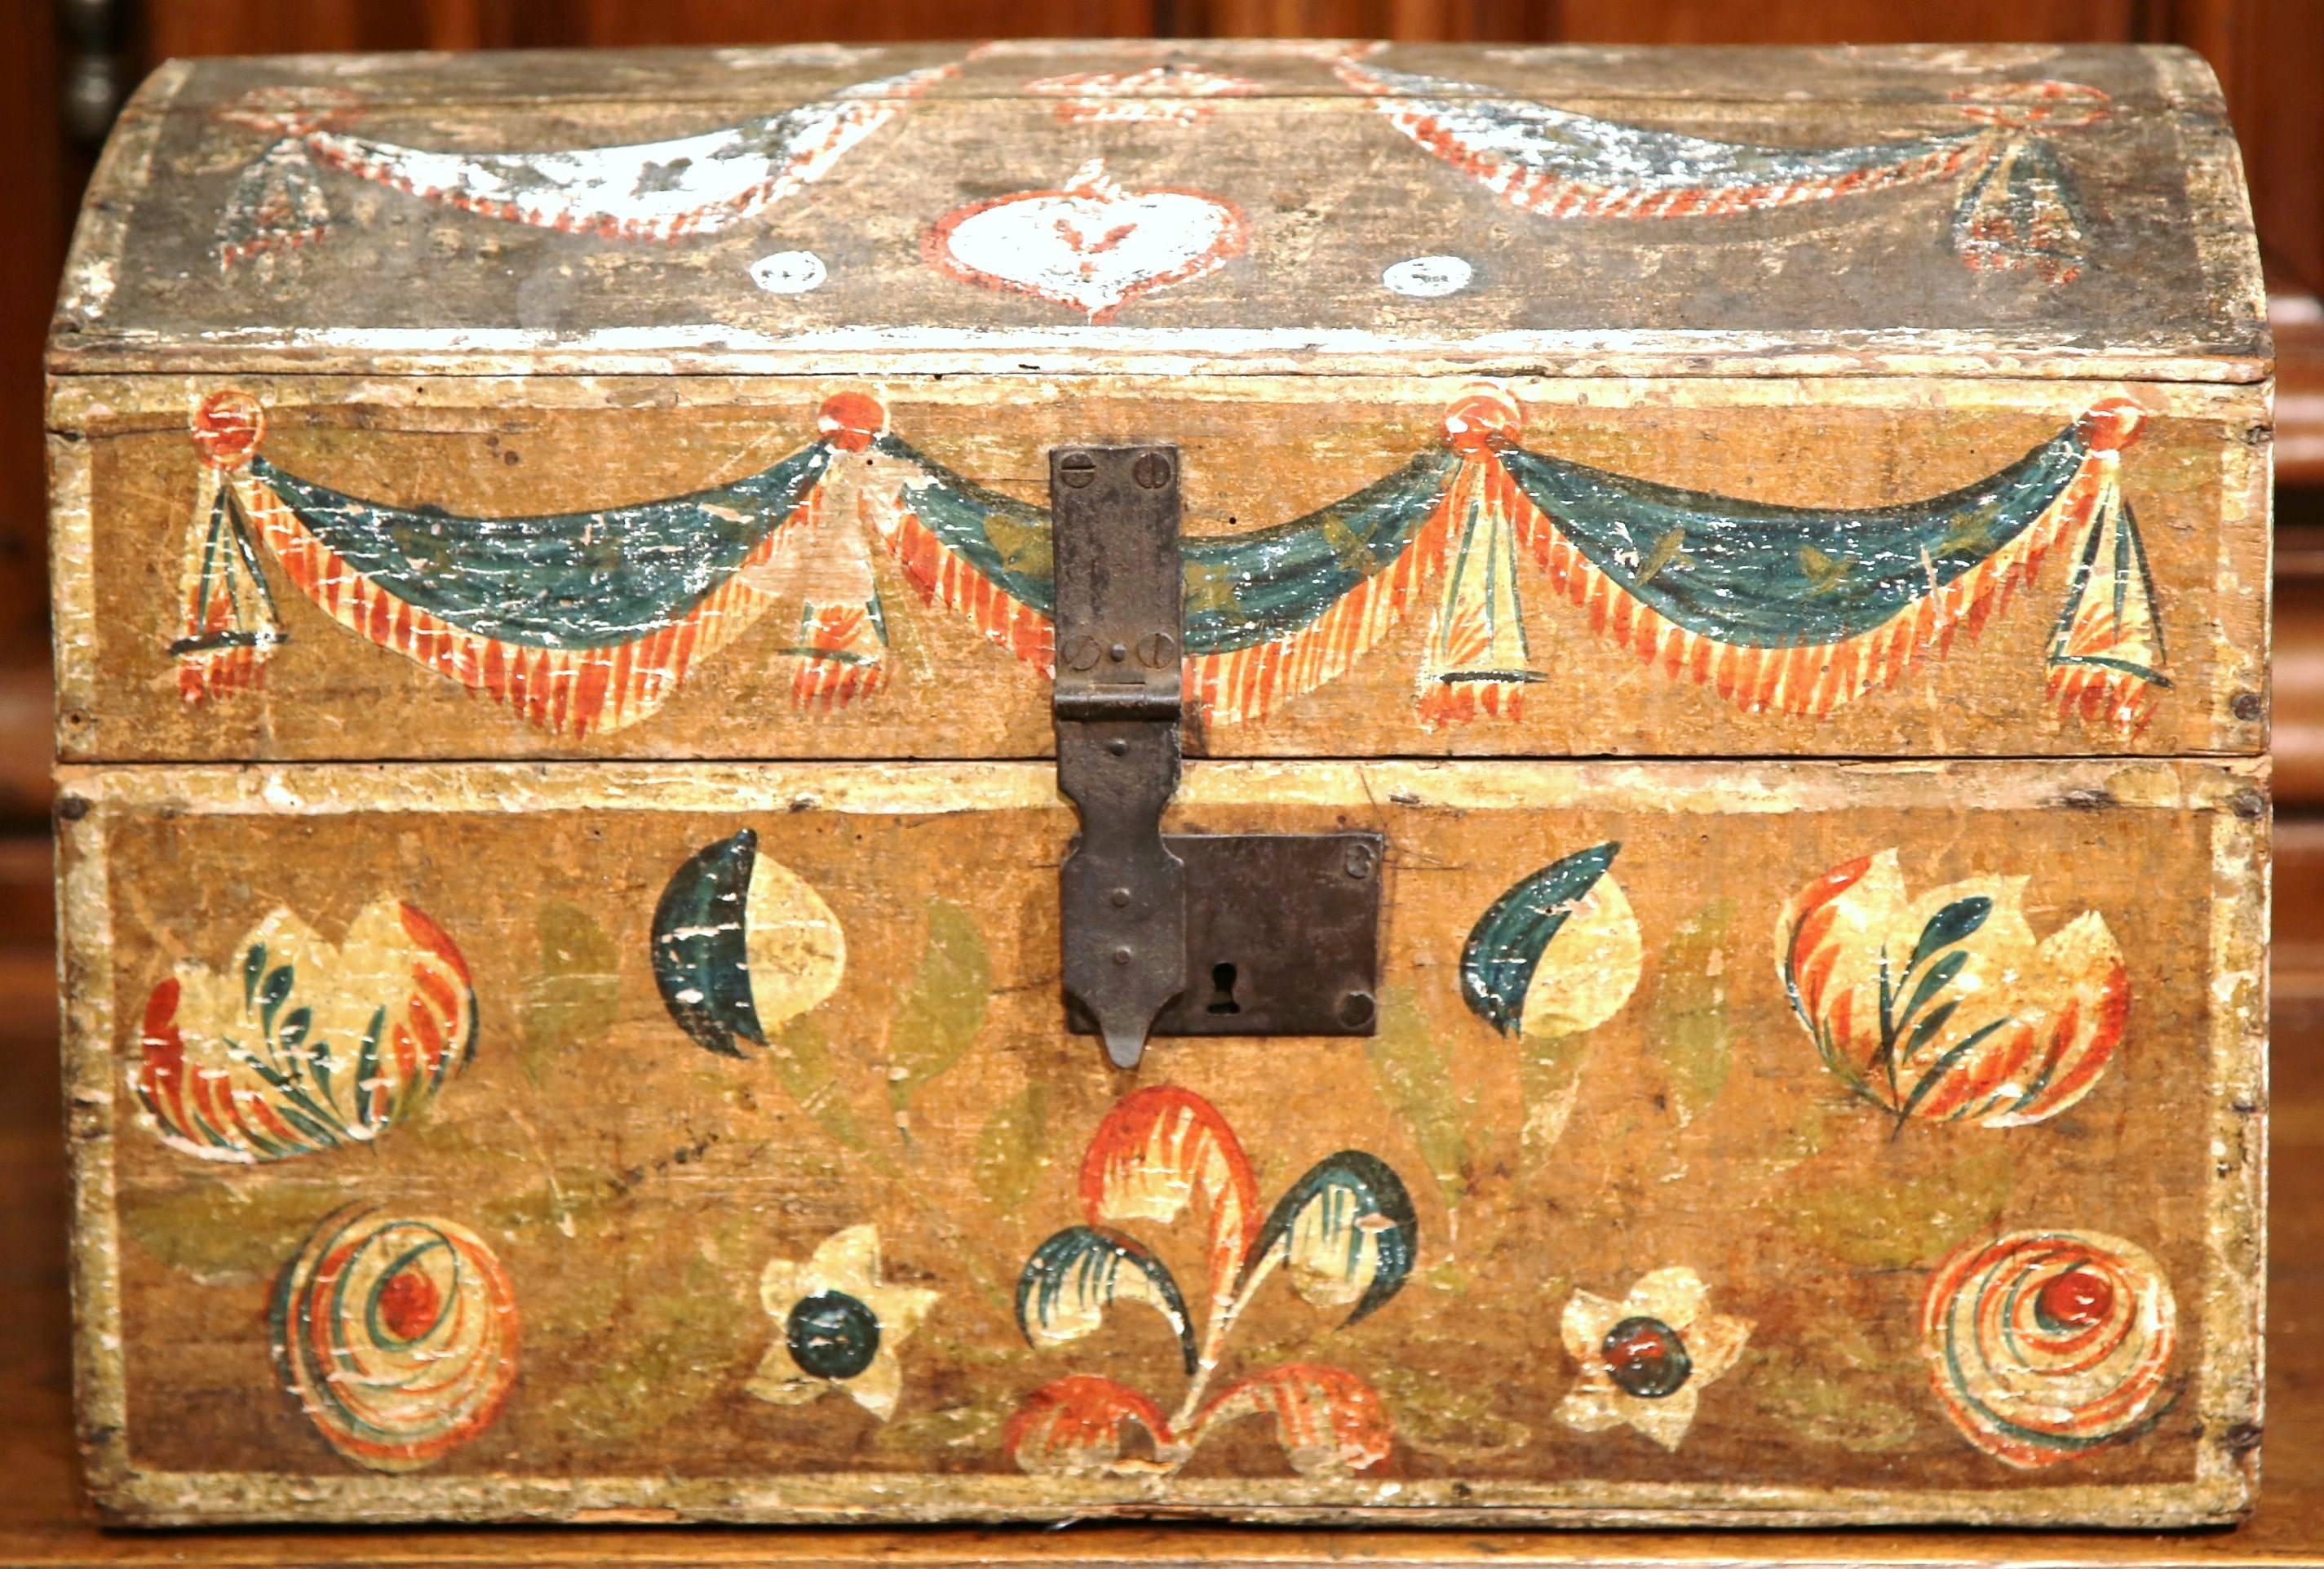 This beautifully executed antique wedding trunk was carved in northern France, circa 1780. The decorative, arched box features its original painted finish in a terracotta and yellow palette. The traditional trunk is decorated with two doves on the